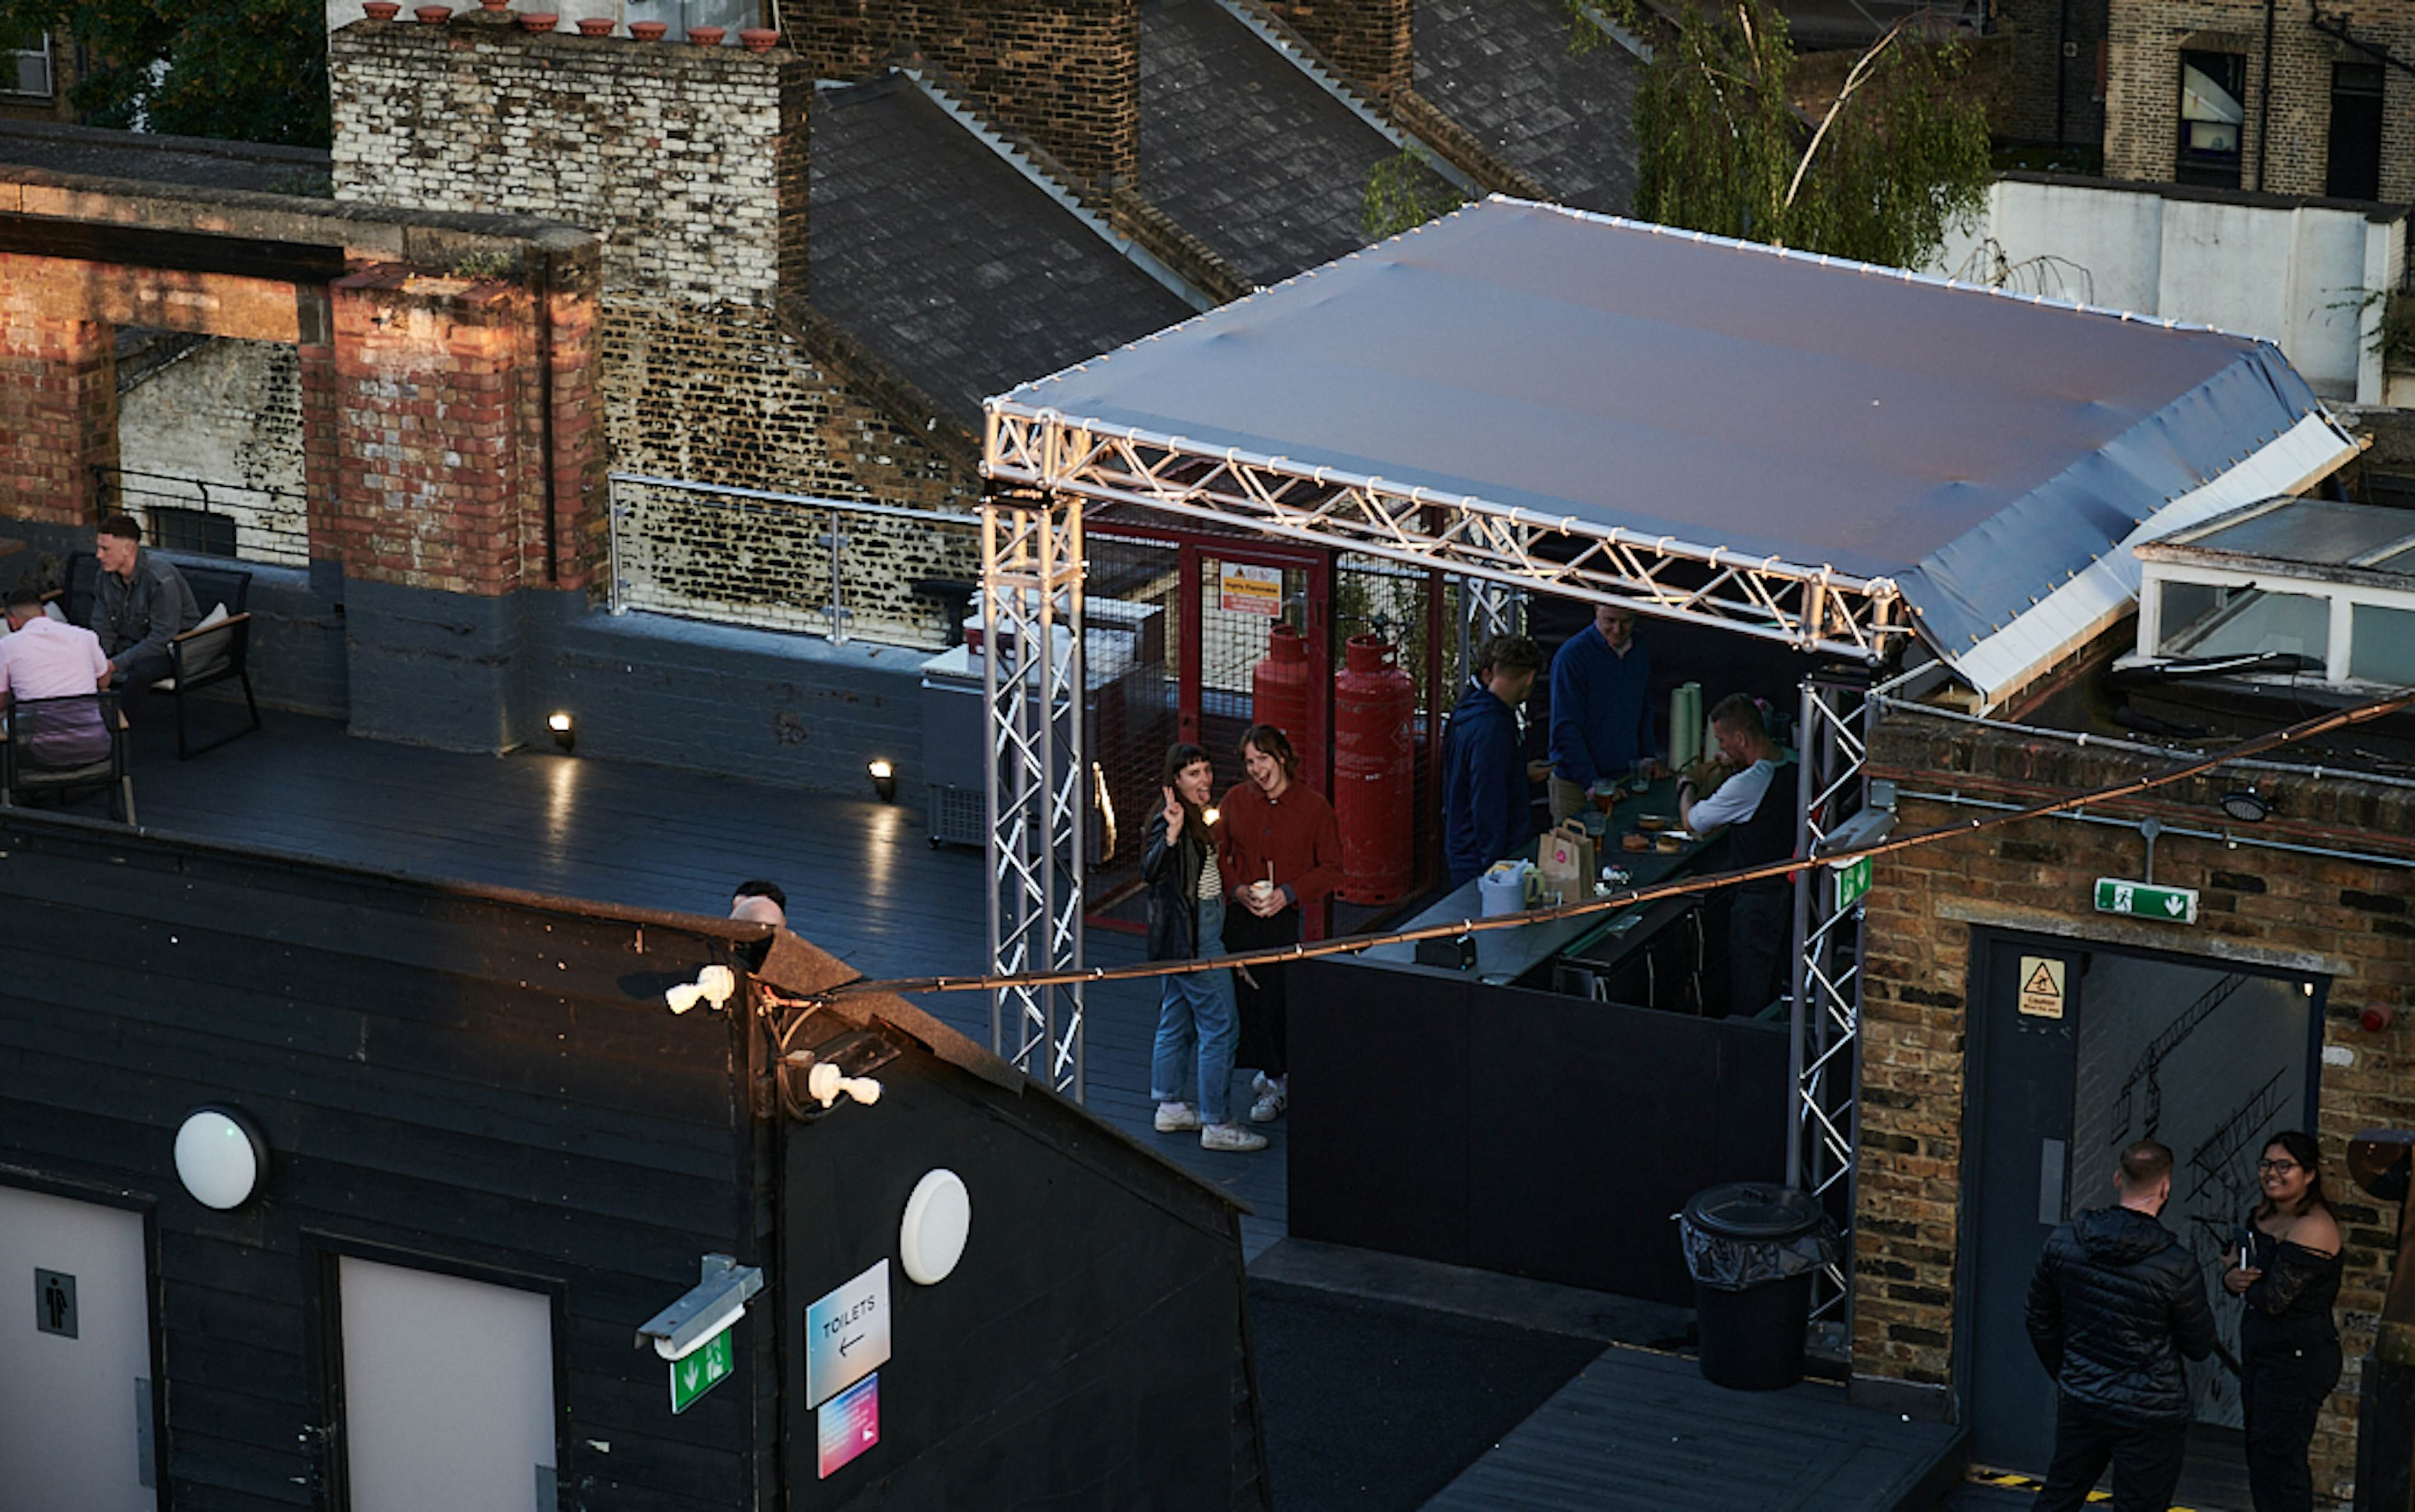 Dalston Roofpark (rooftop) - Dalston Roofpark image 1